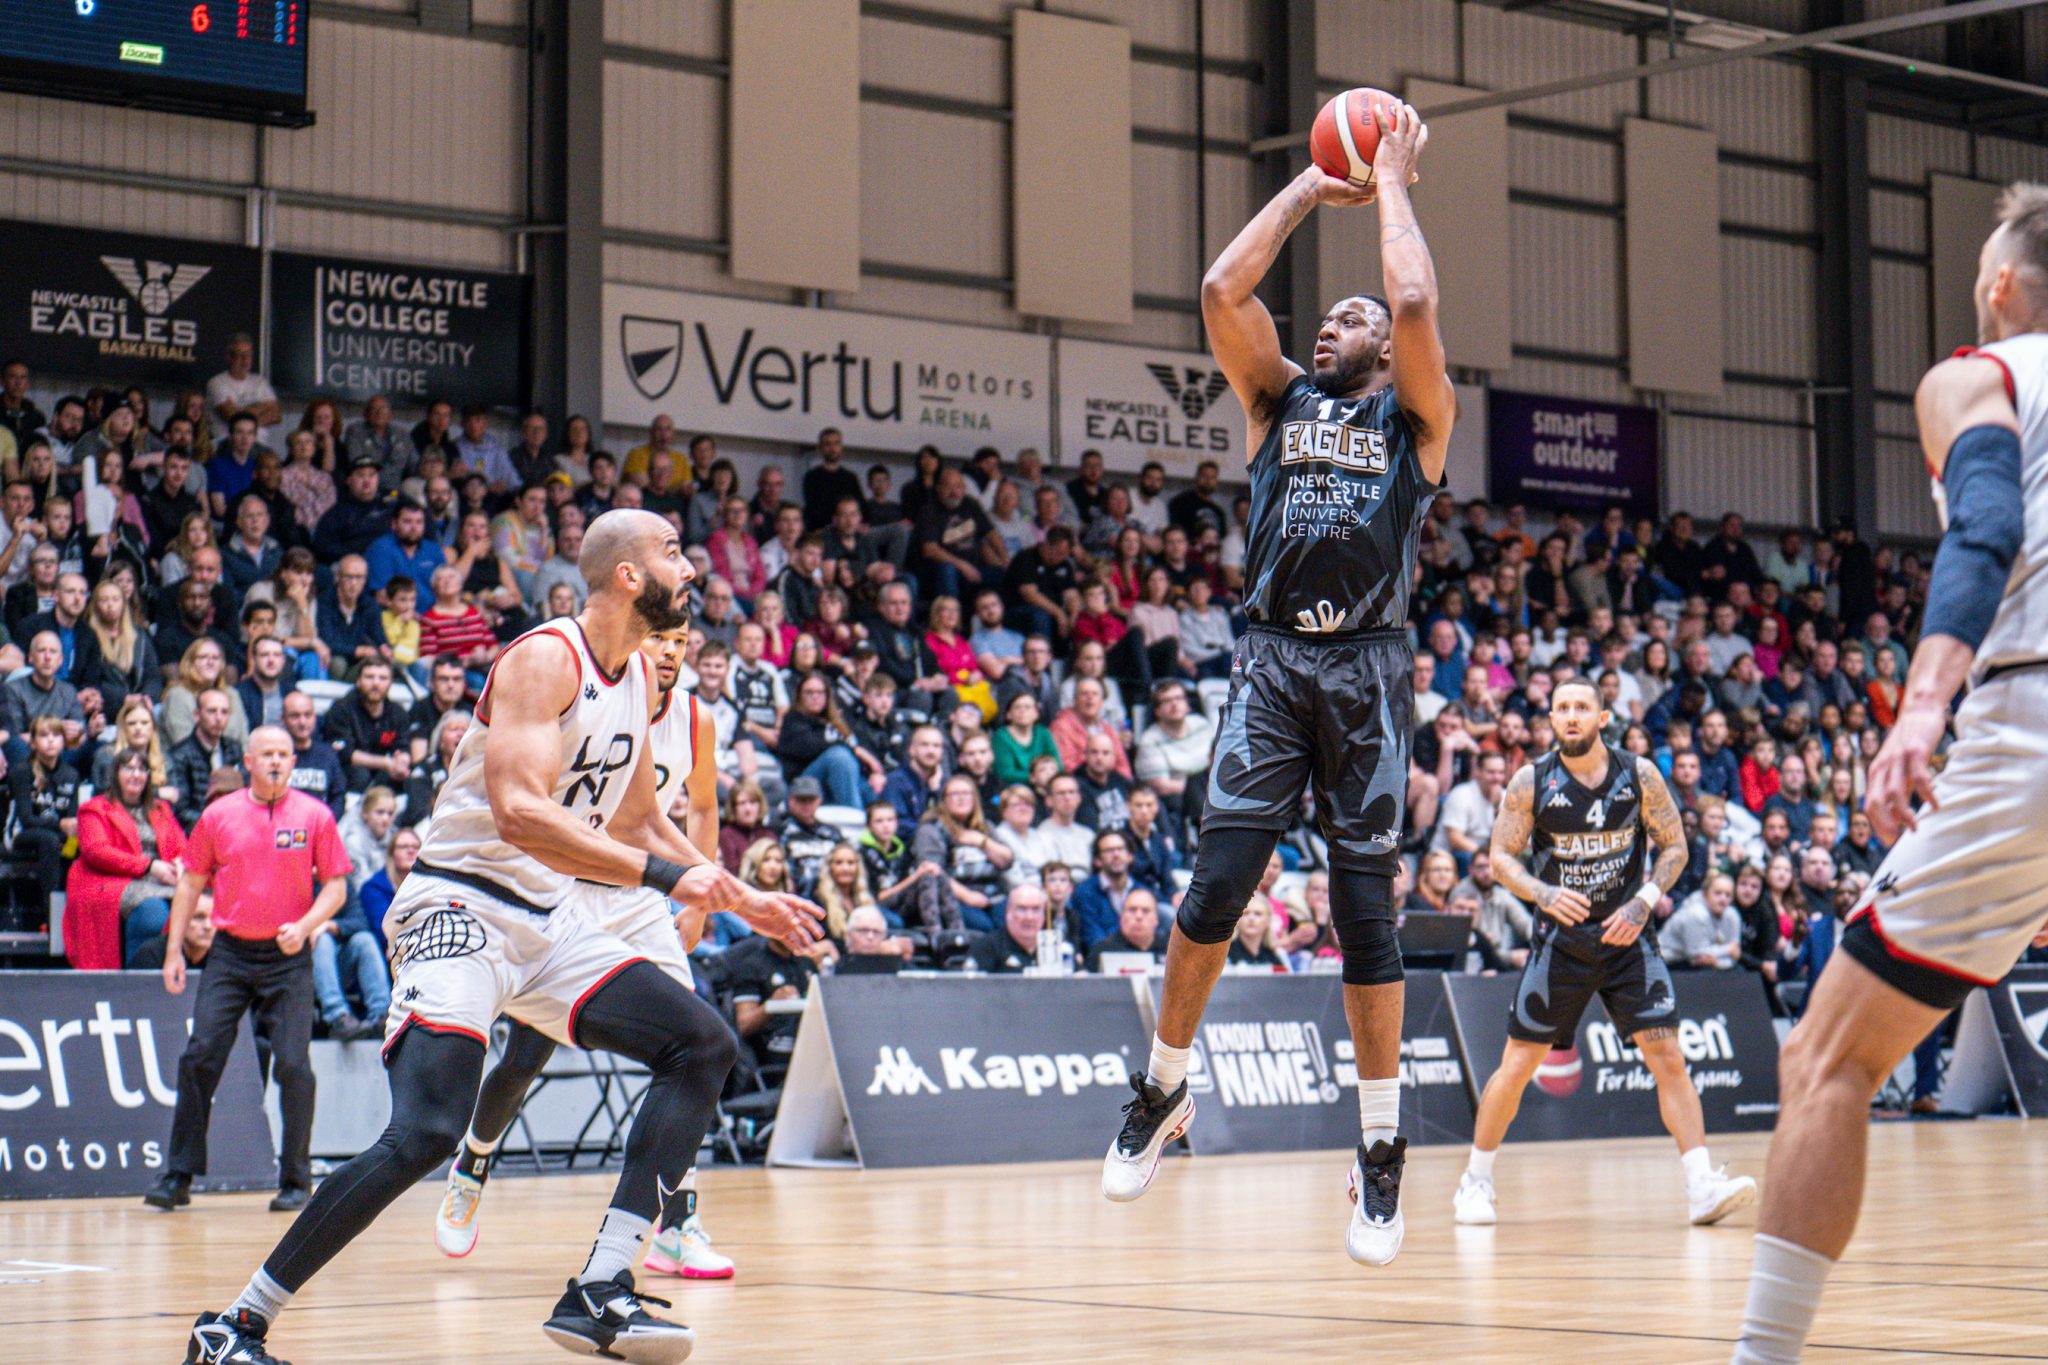 How To Watch Tosan Evbuomwan In The NBA Draft Tonight – Newcastle Eagles